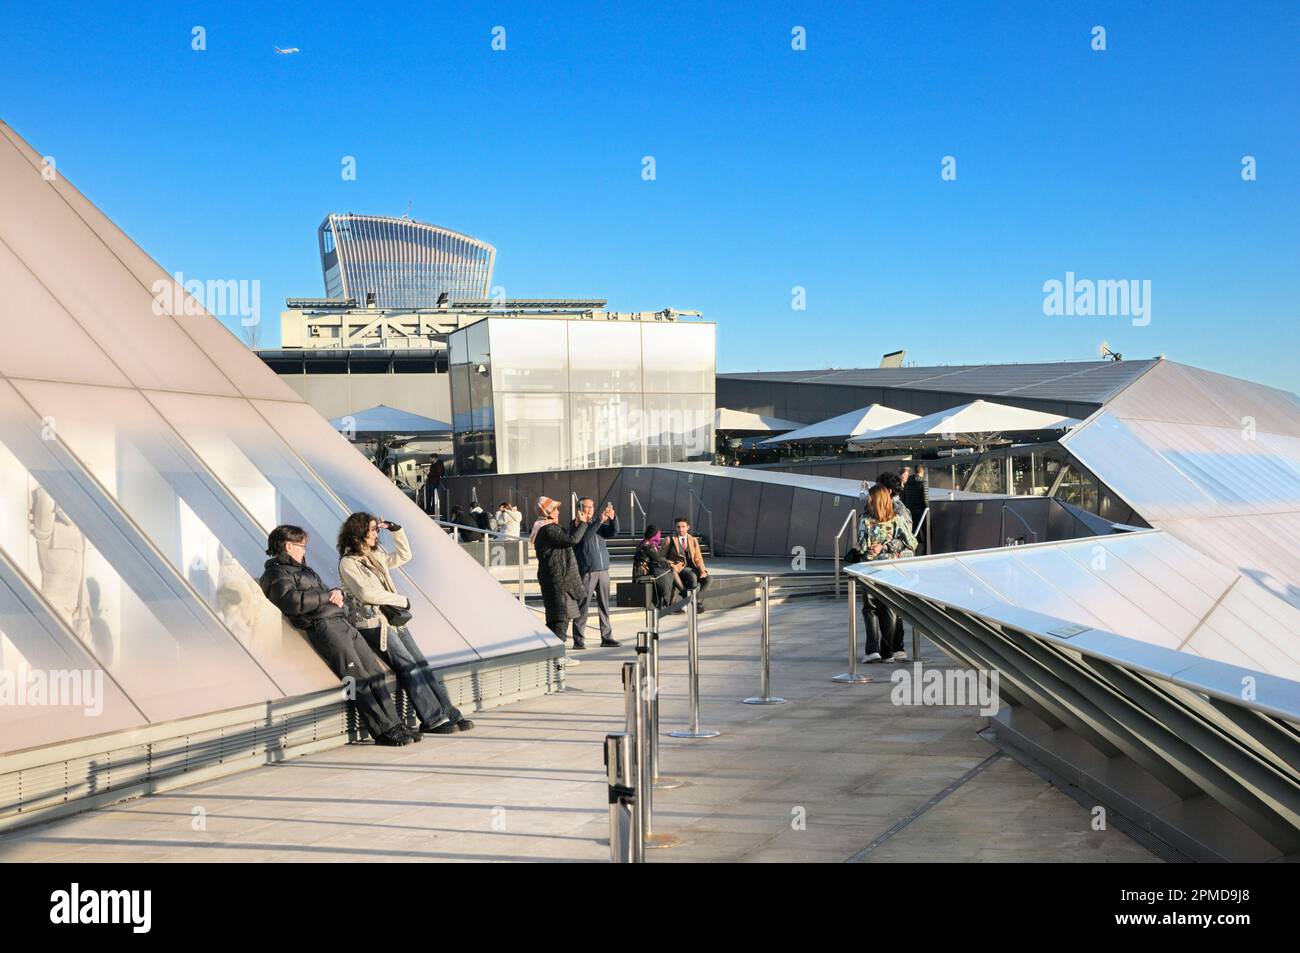 People enjoying the sunshine and views on the rooftop terrace of One New Change, City of London, England, UK Stock Photo